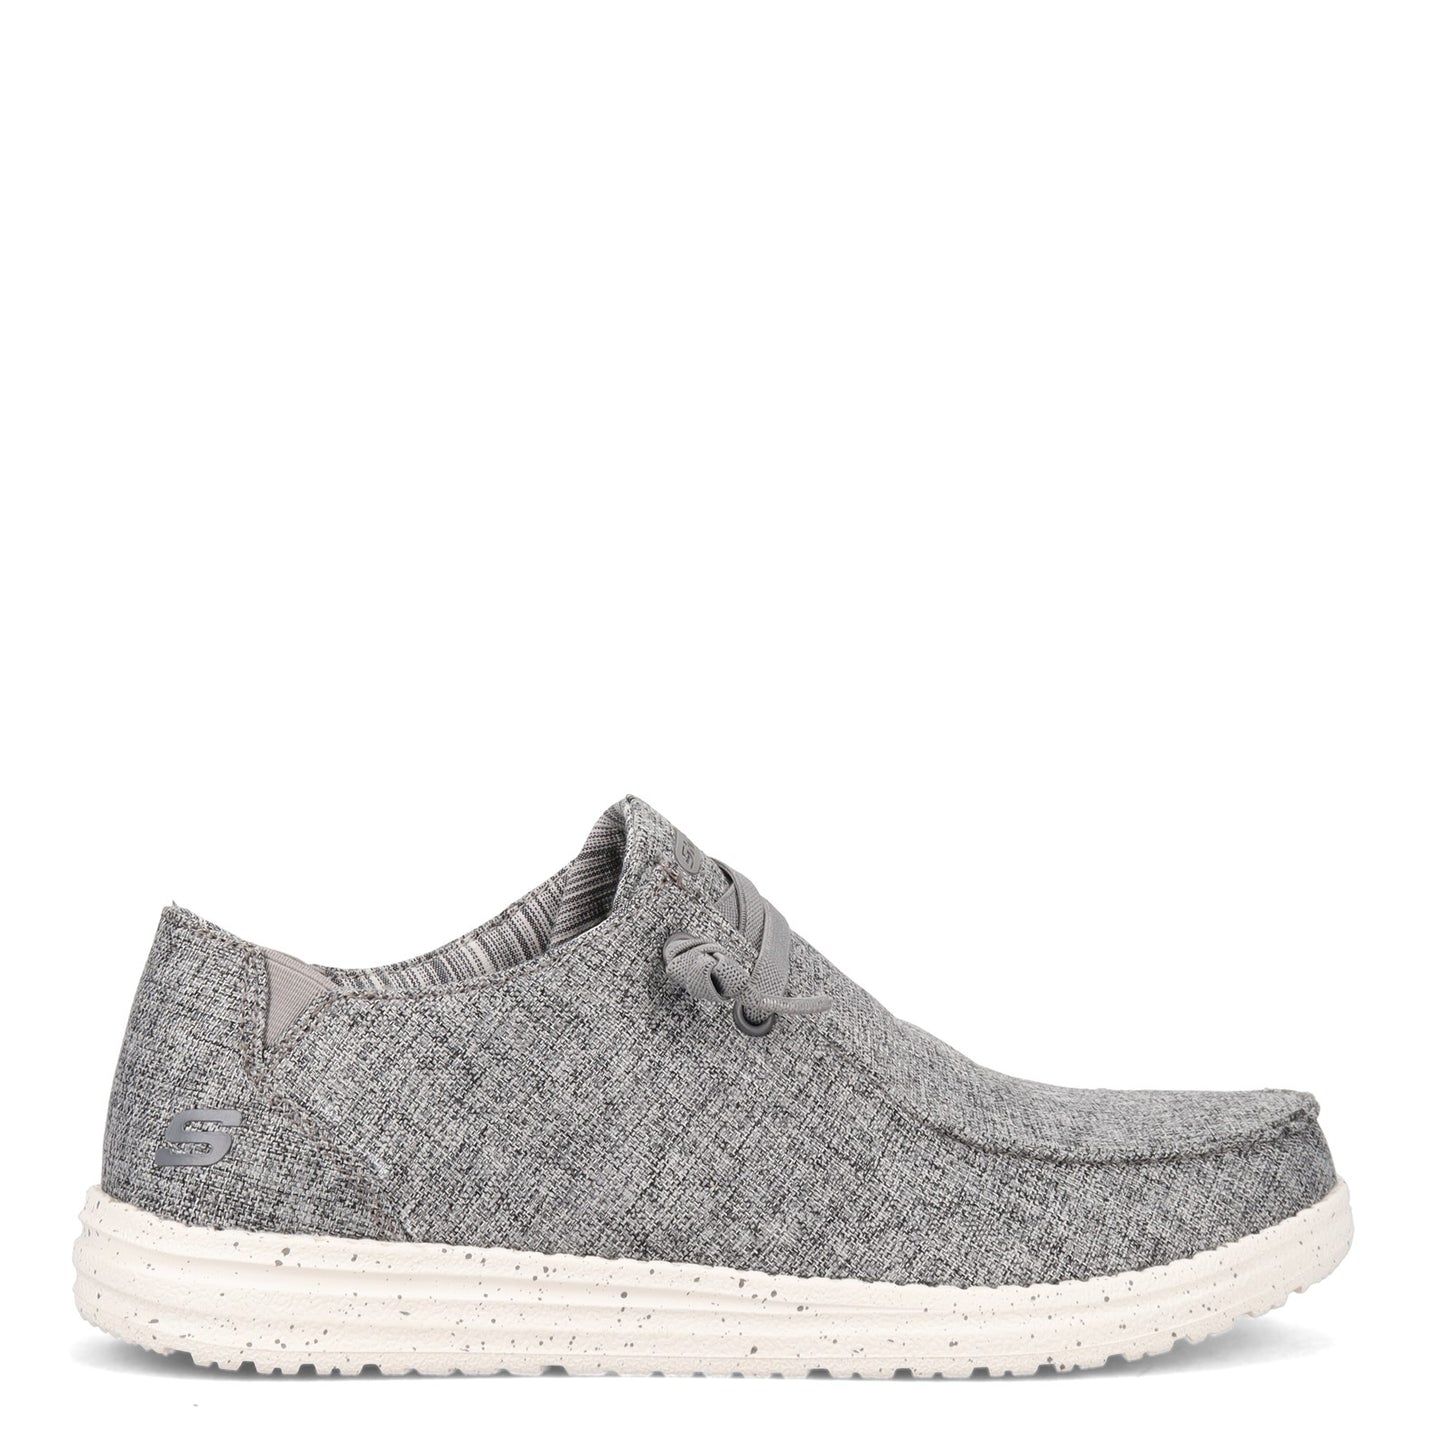 Peltz Shoes  Men's Skechers Relaxed Fit: Melson - Chad Slip-On GRAY 210101-GRY